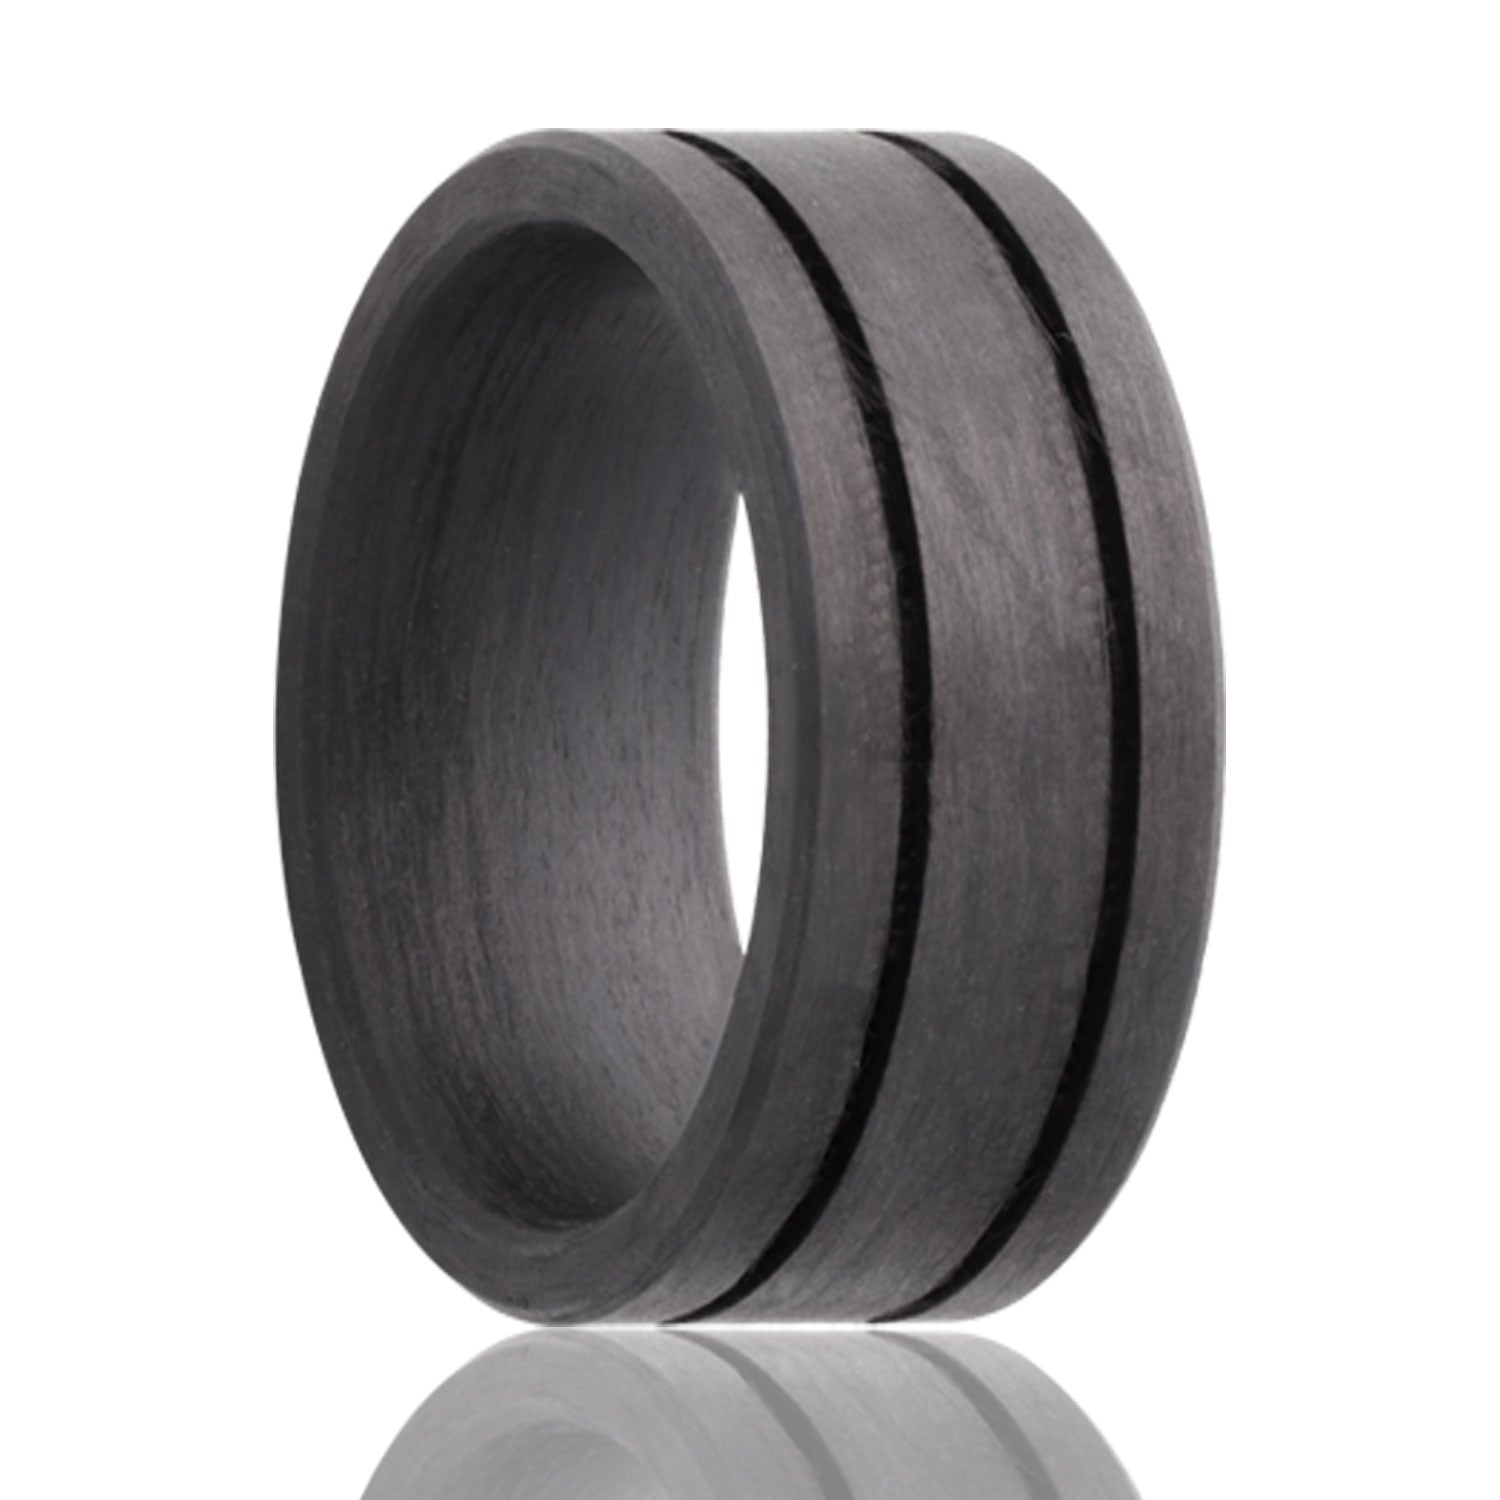 A dual grooved carbon fiber men's wedding band displayed on a neutral white background.